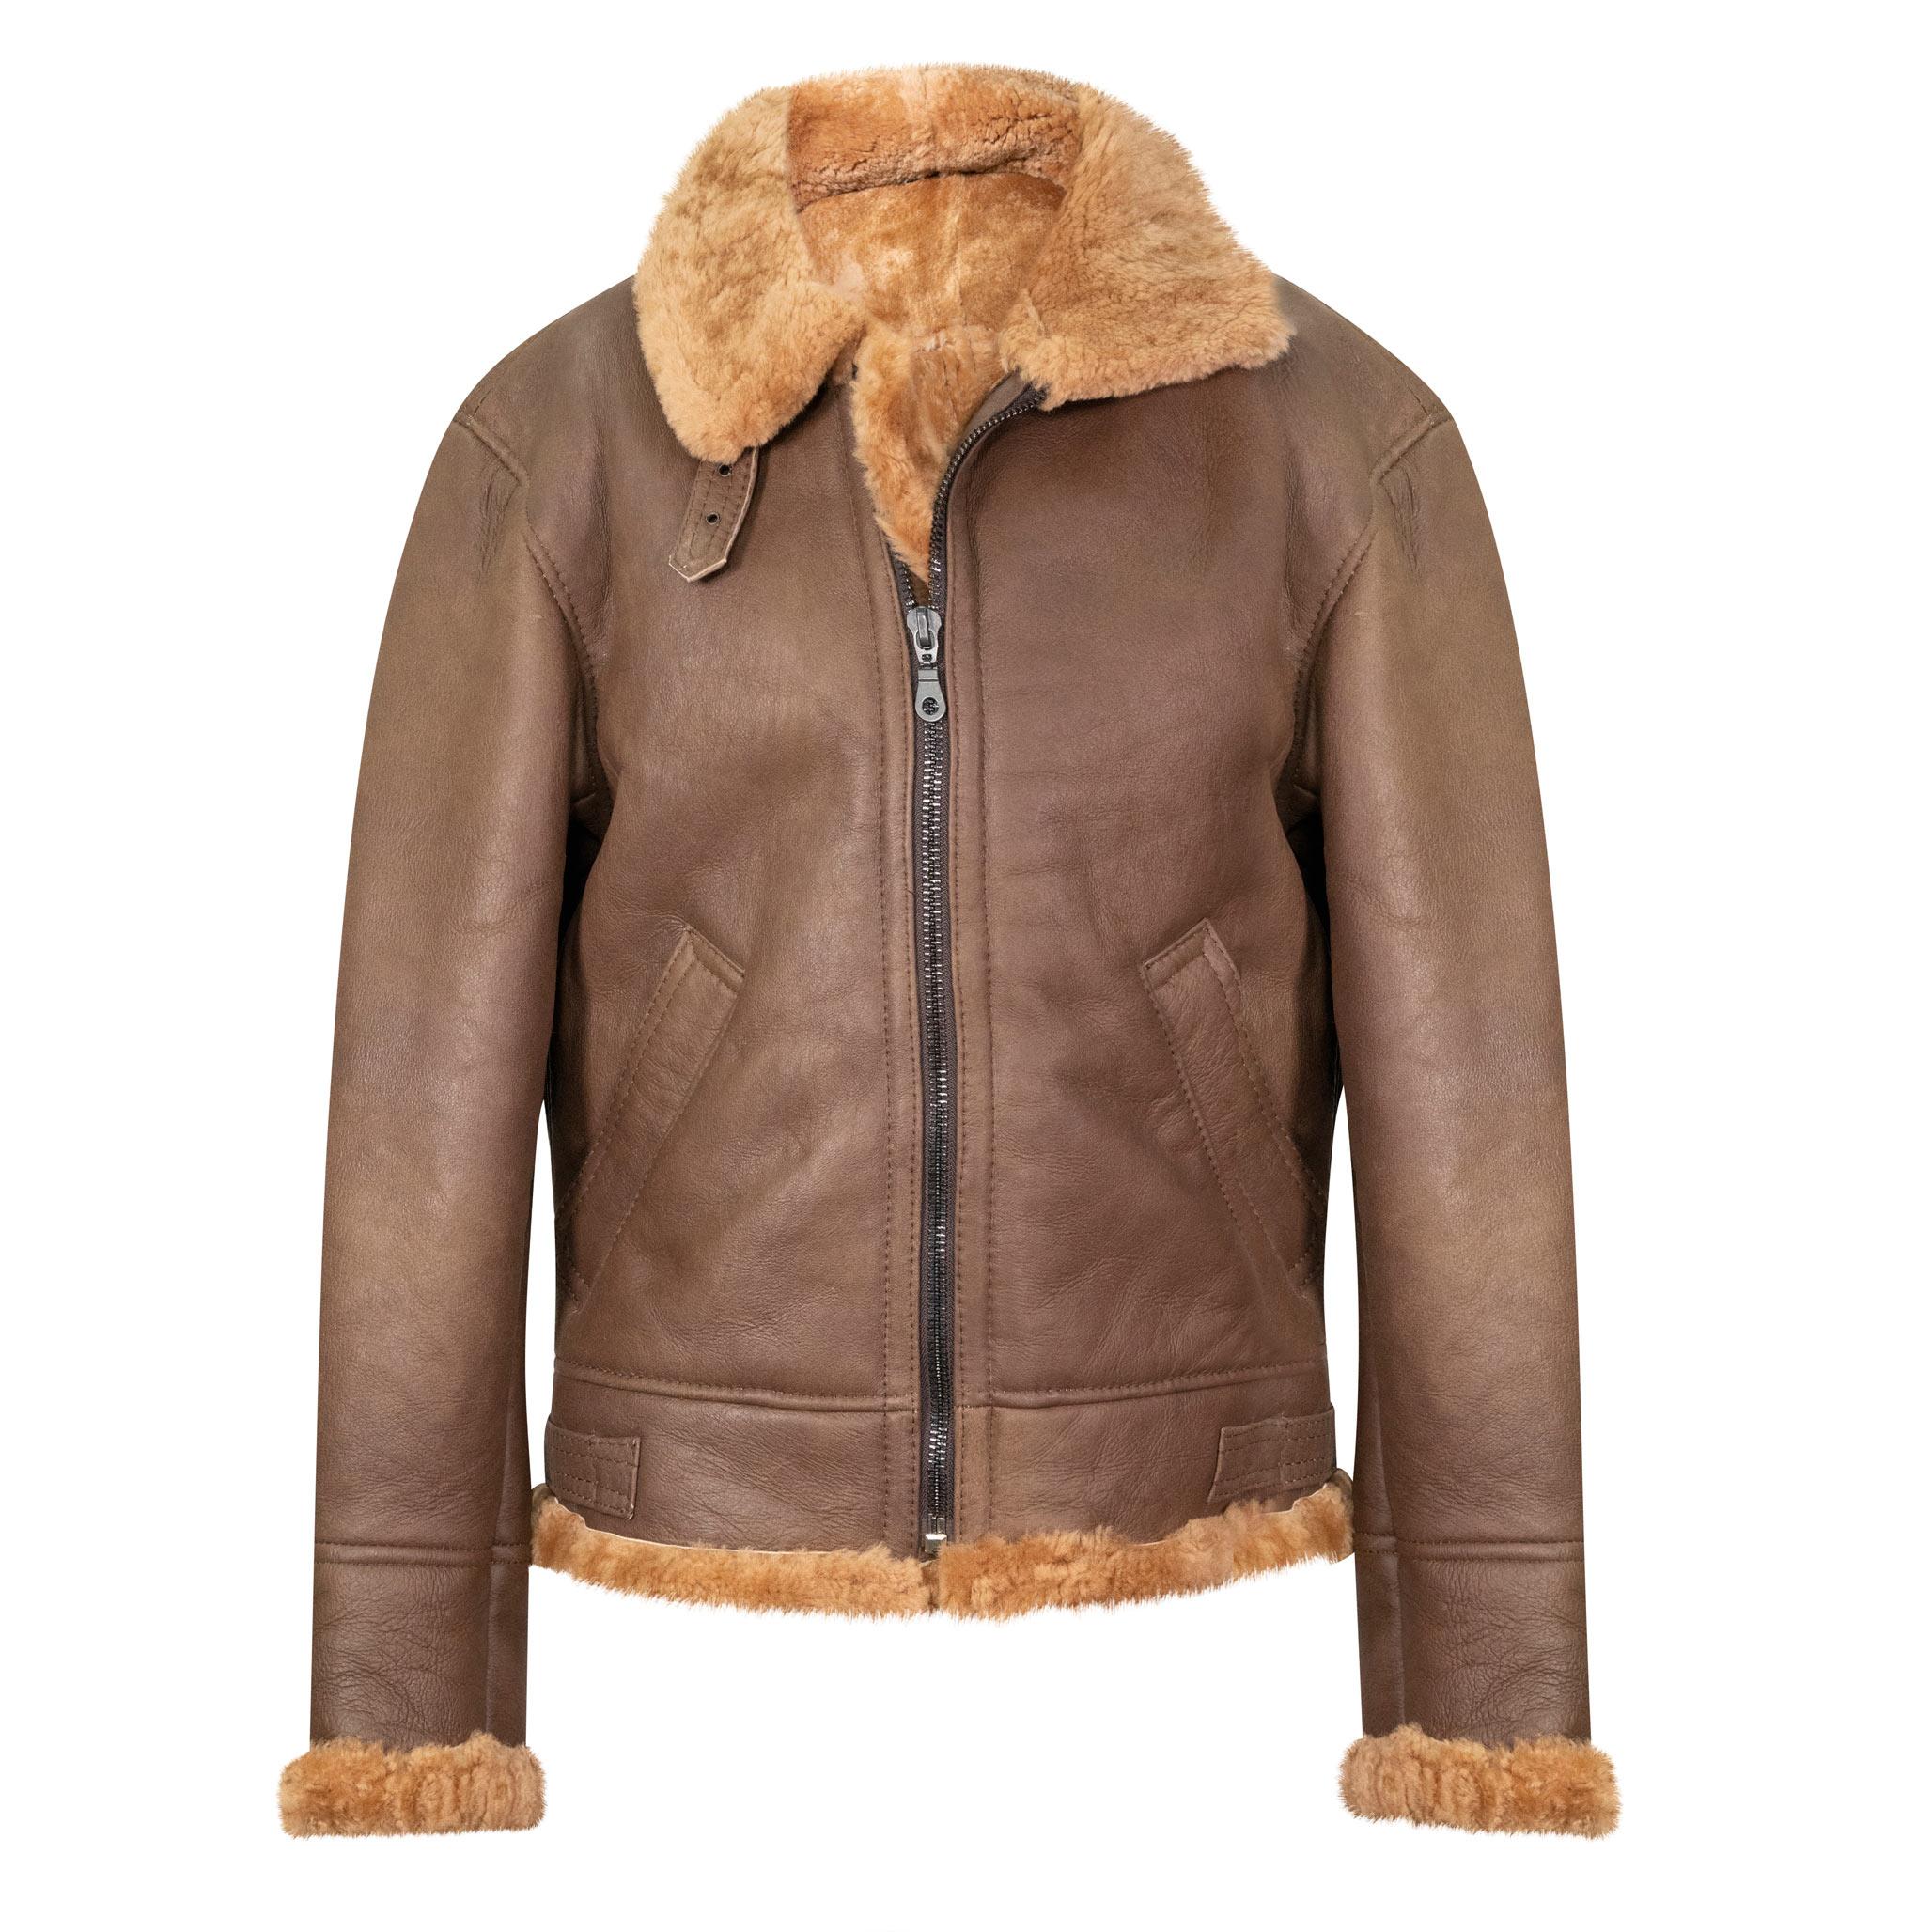 A brown mens sheepskin jacket with a sleek finish. Front zip closure, and side pockets.